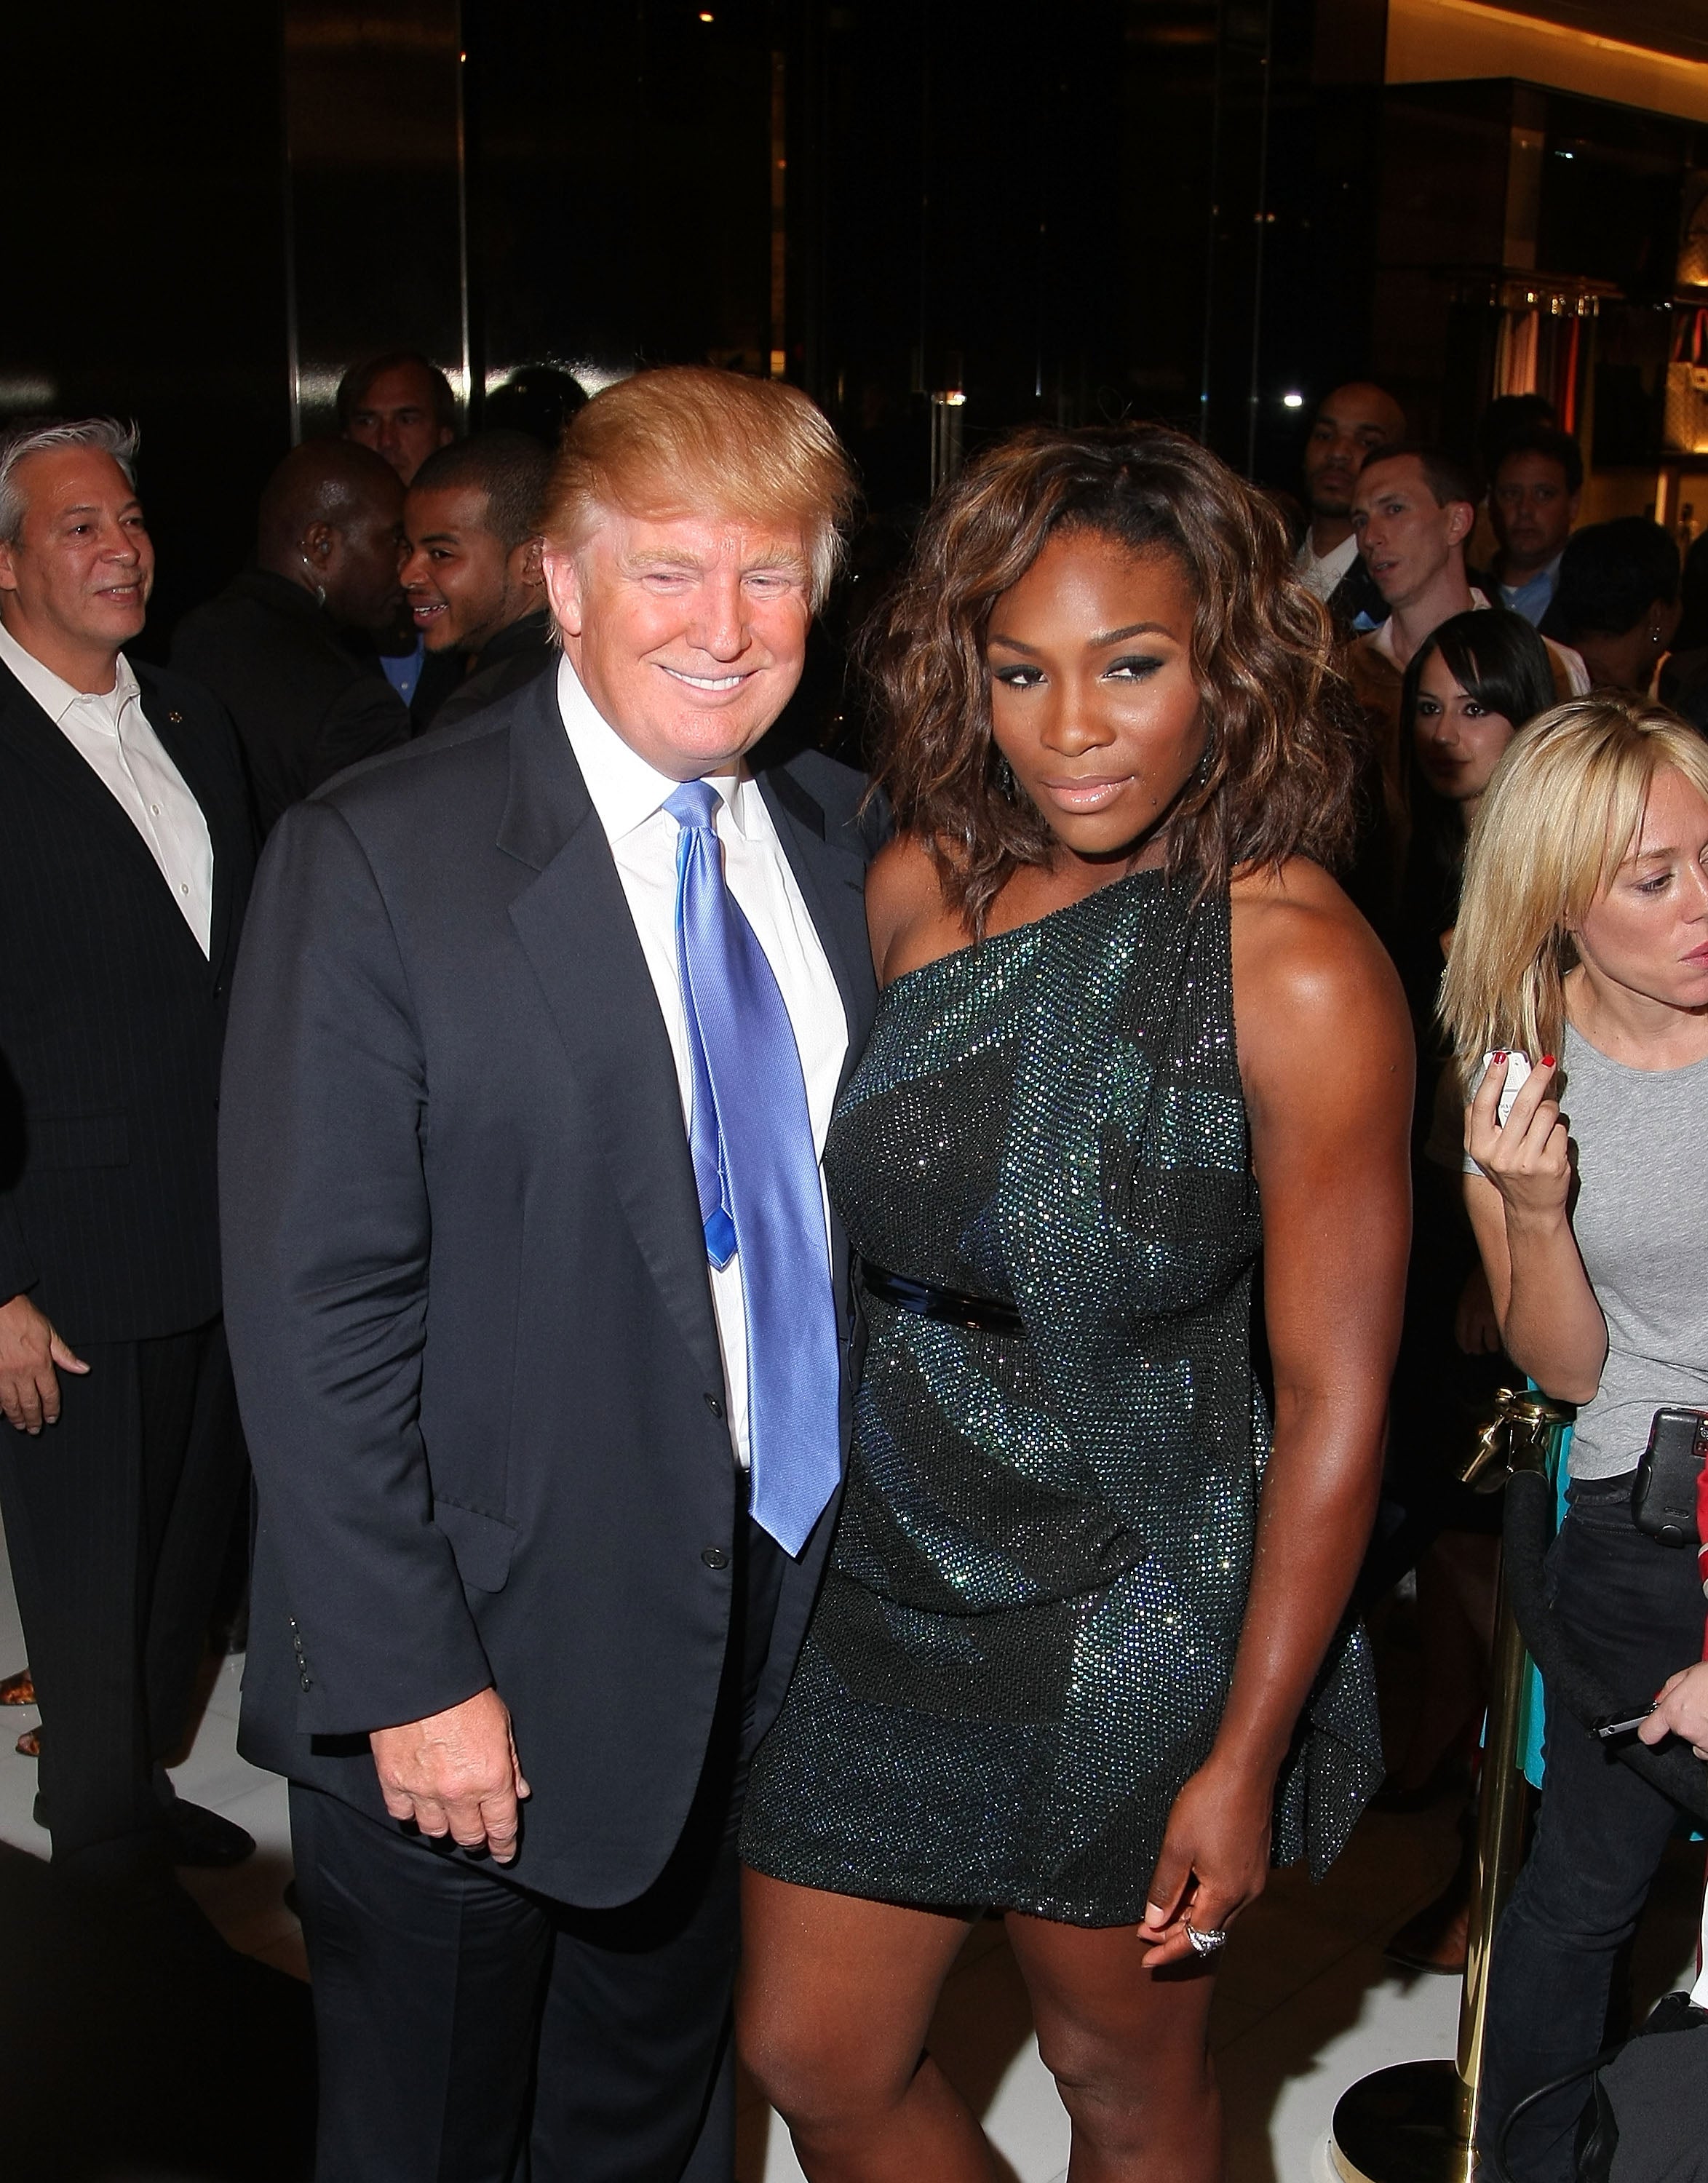 Trump and Williams were spotted meeting at a Gucci cocktail party in 2009